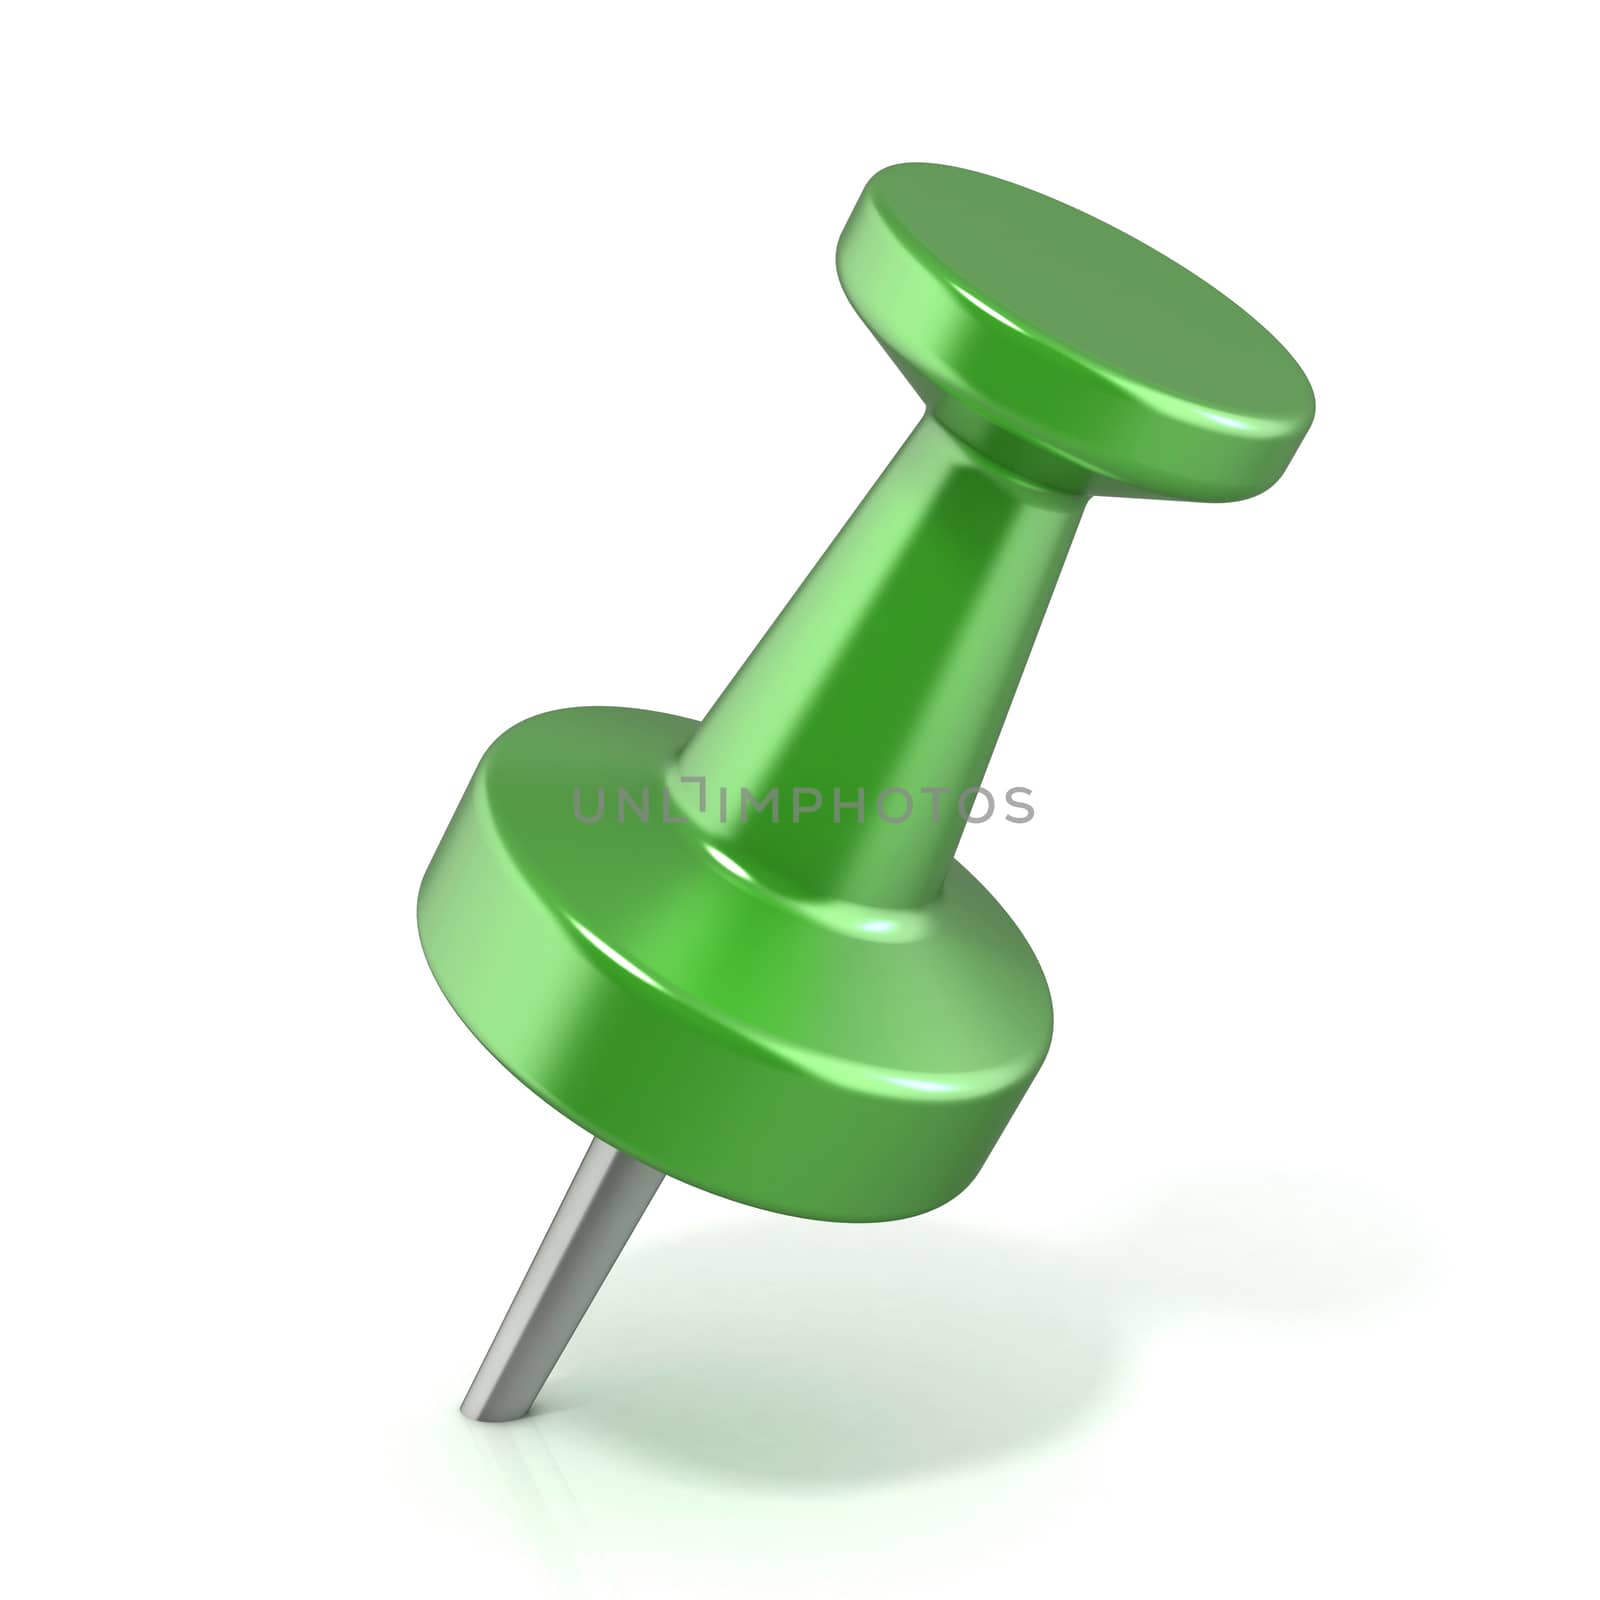 Green pushpin, stabbed.3D render illustration isolated on white background.